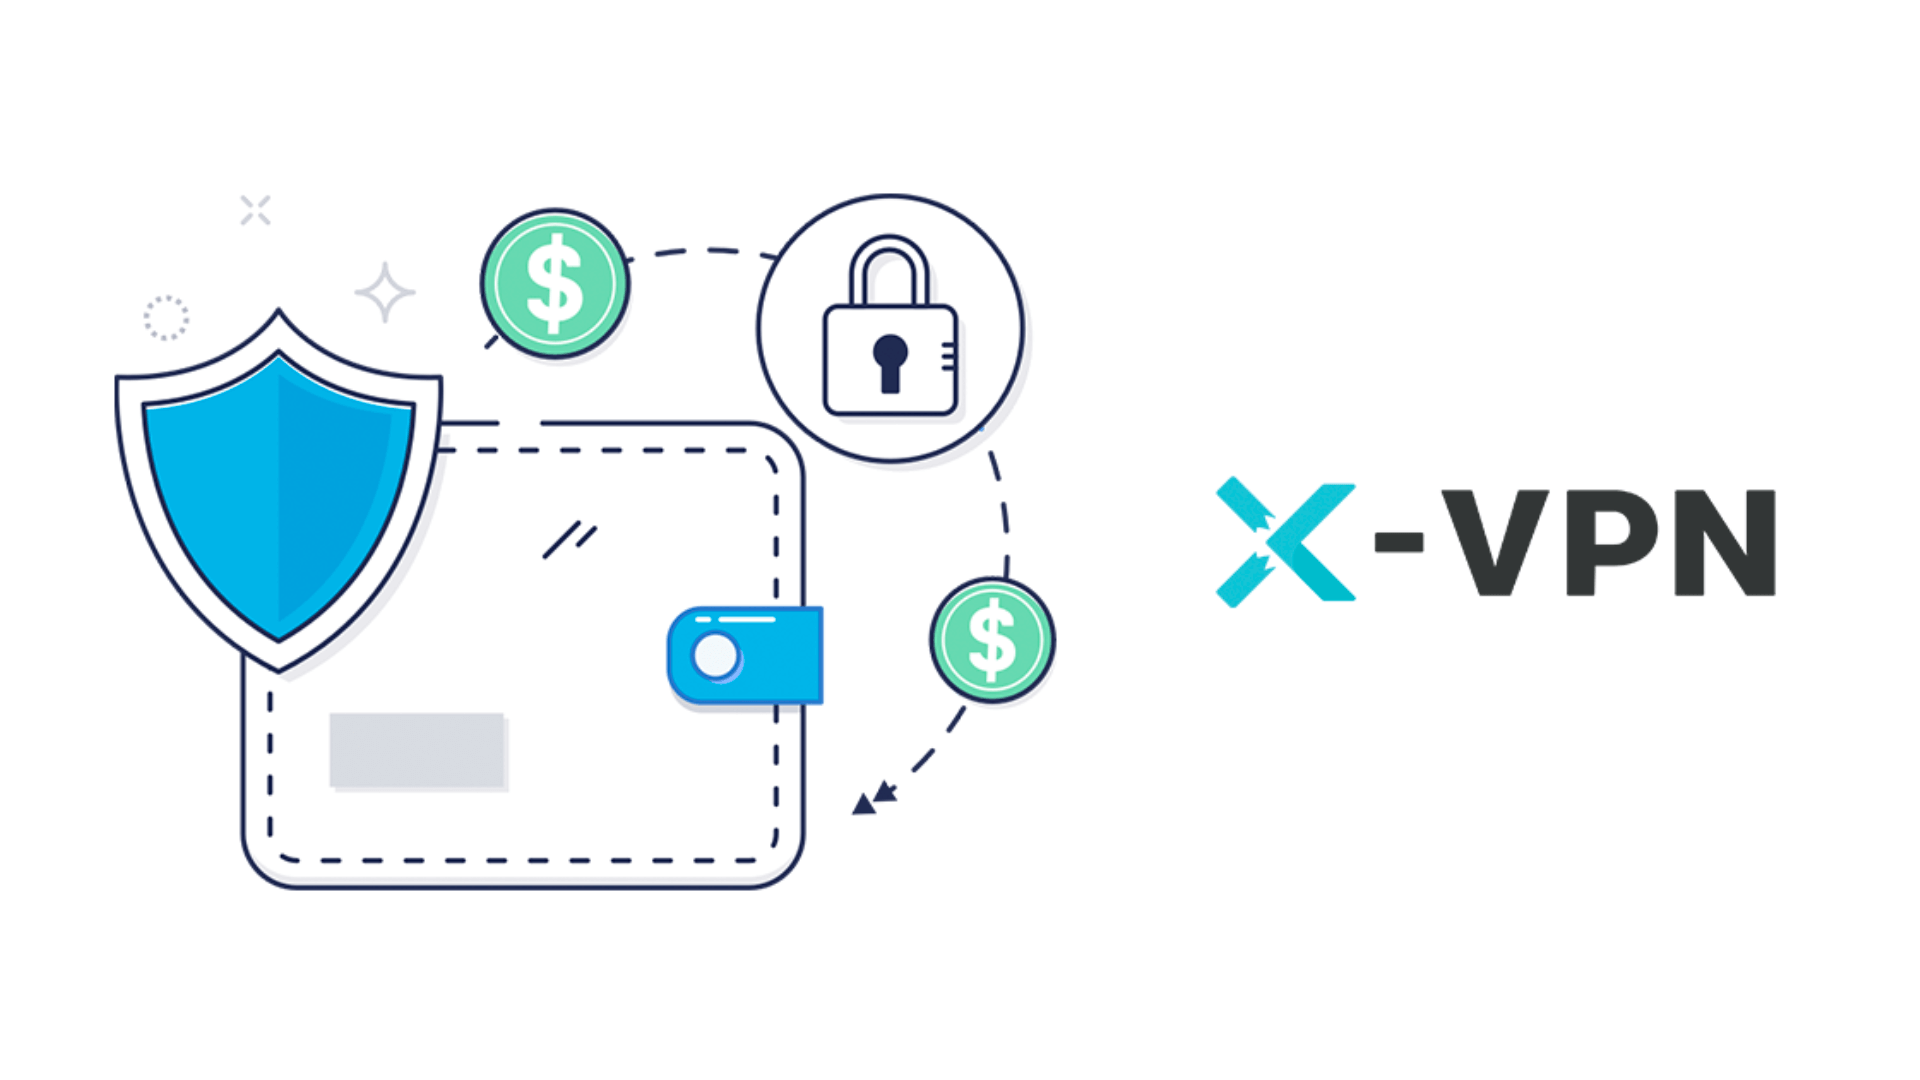 It is worth using the fast and safe X-VPN